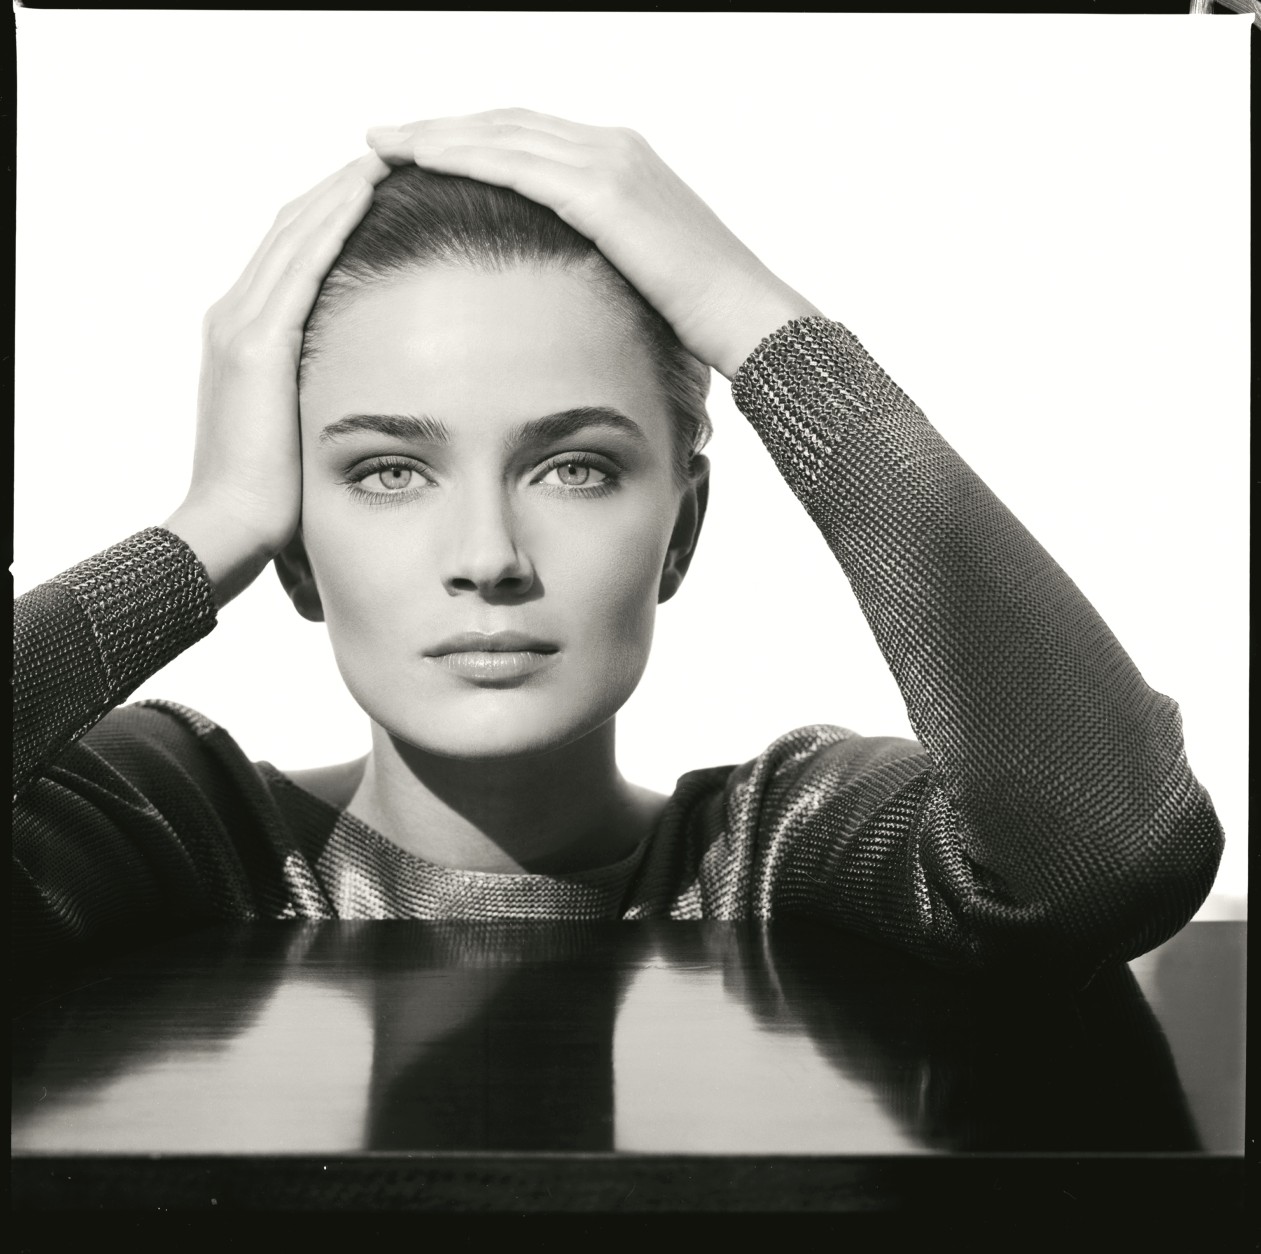 From Models of Influence: 50 Women Who Reset the Course of Fashion by Nigel Barker; photograph of Paulina Porizkova by Victor Skrebneski, 1988. Published by Harper Design, an imprint of HarperCollins Publishers; © 2015 by Nigel Barker.